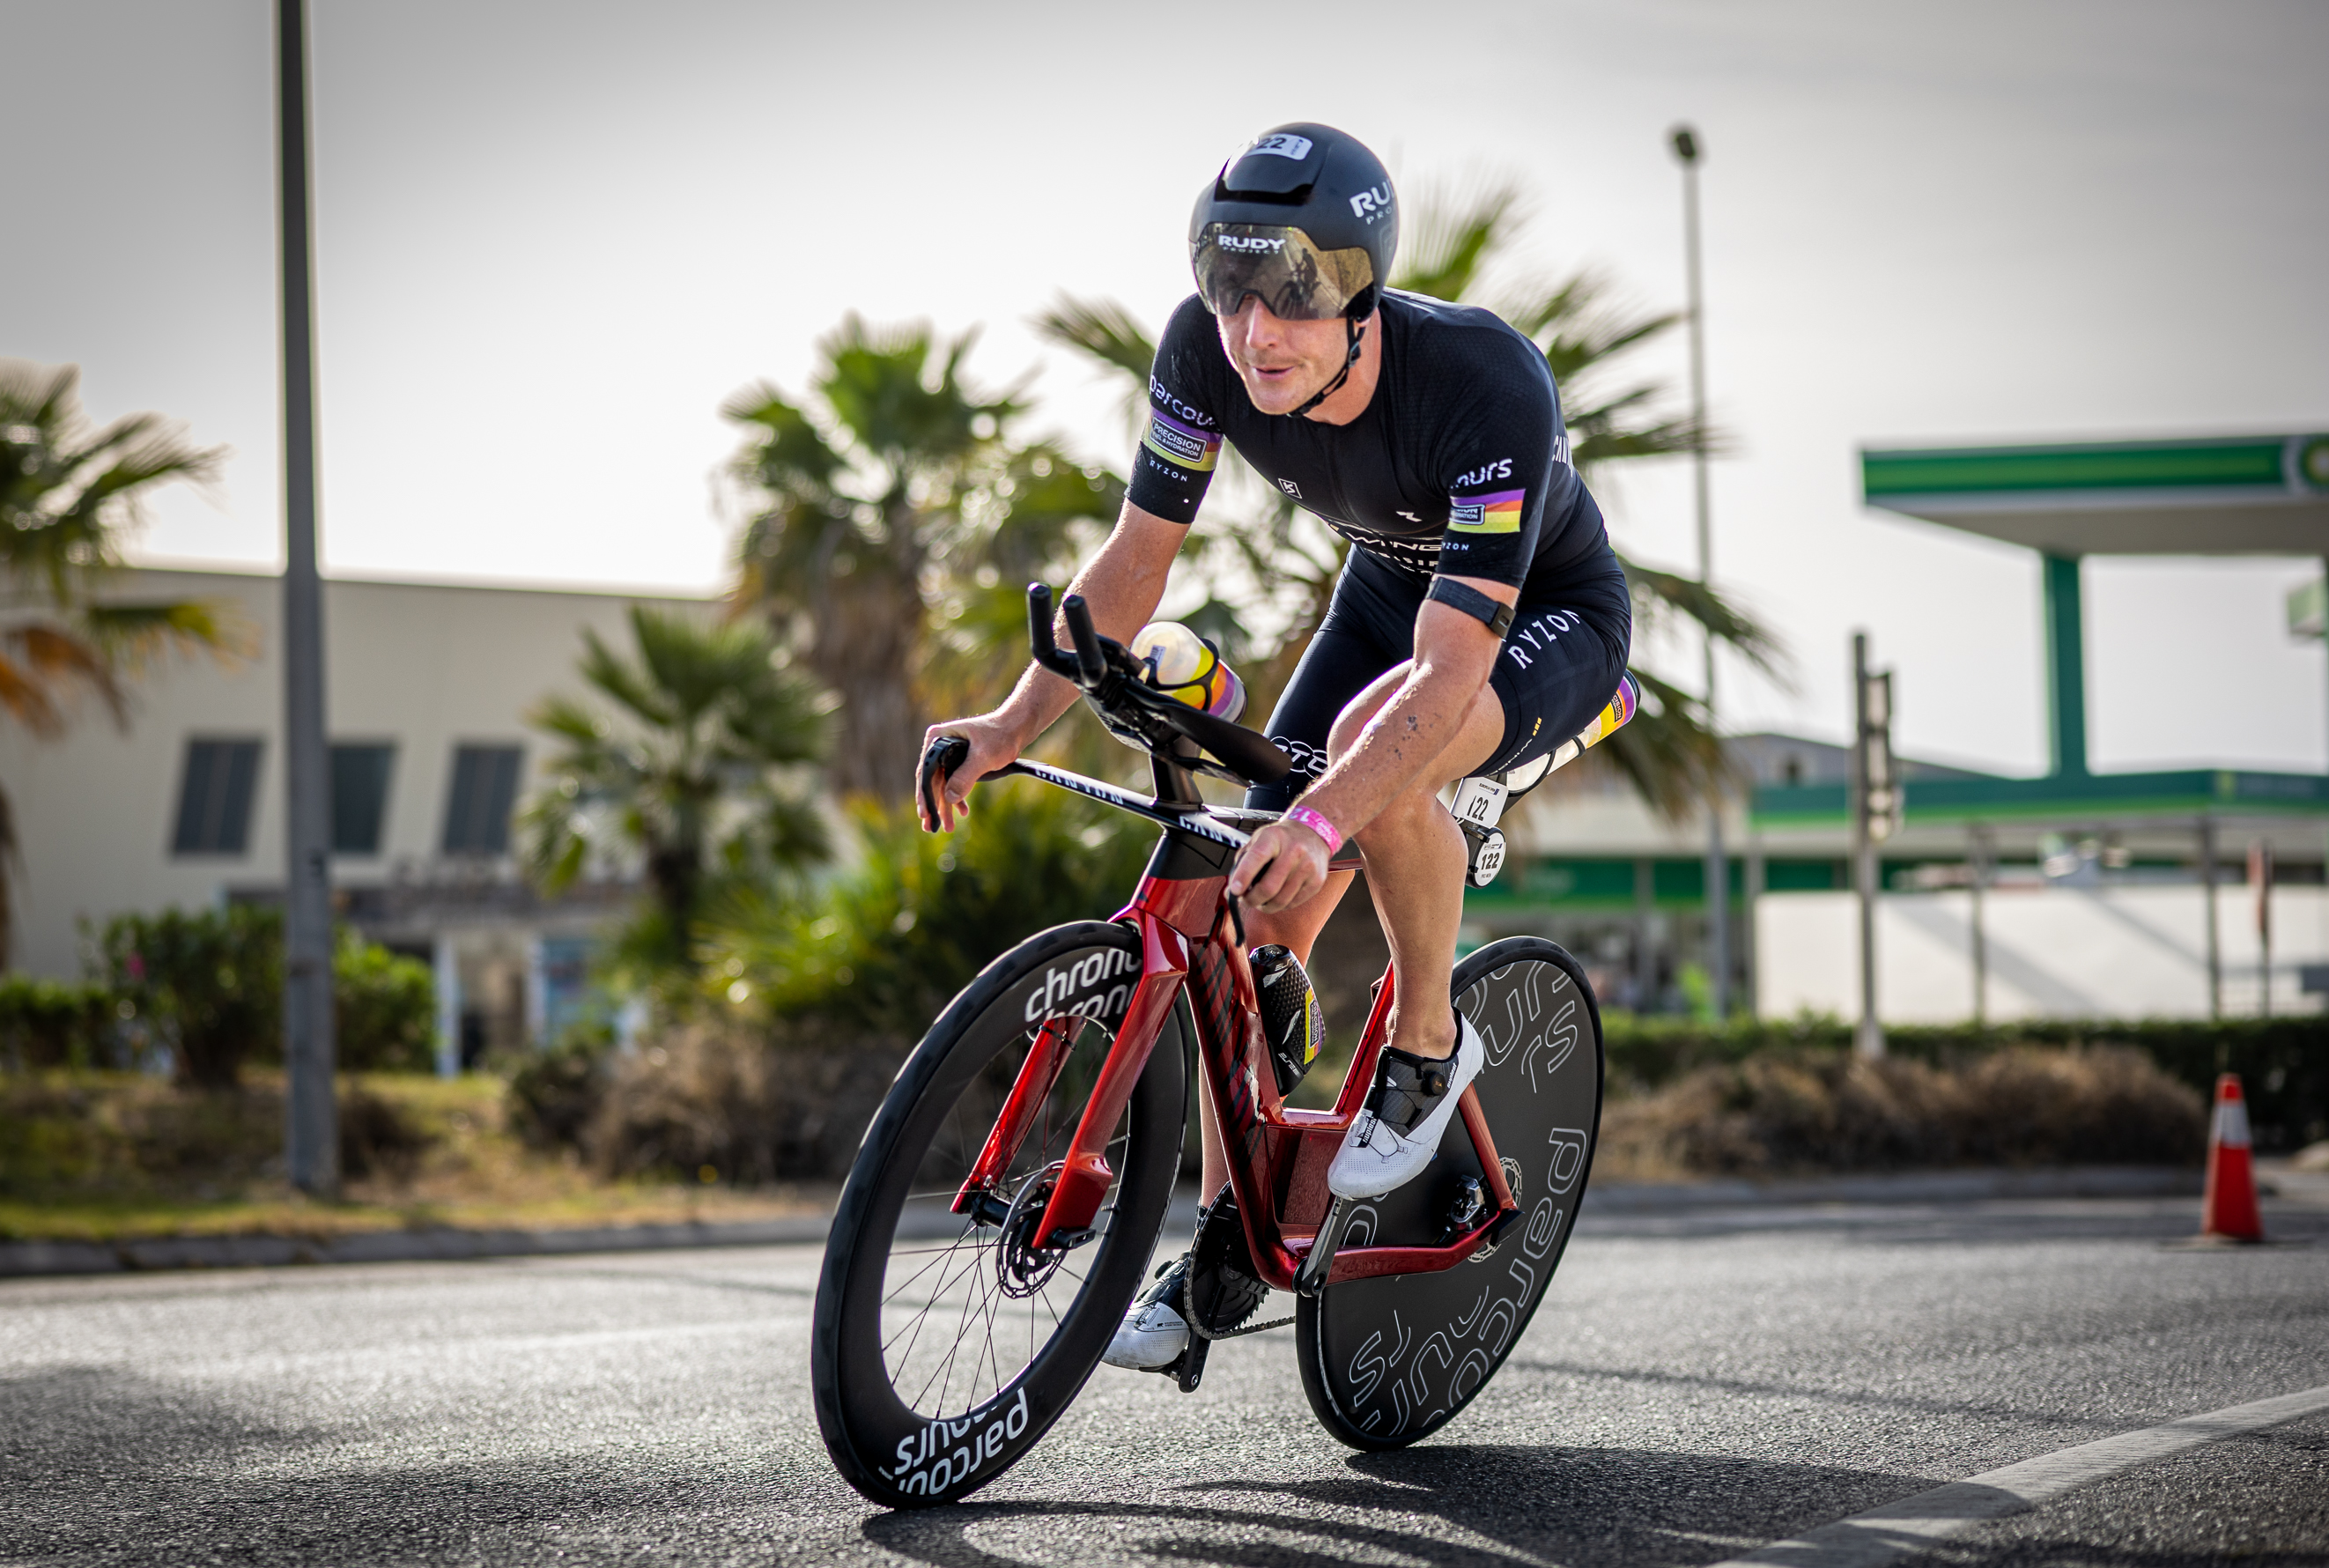 Kyle Smith riding a triathlon bike with Classified Powershift Technology